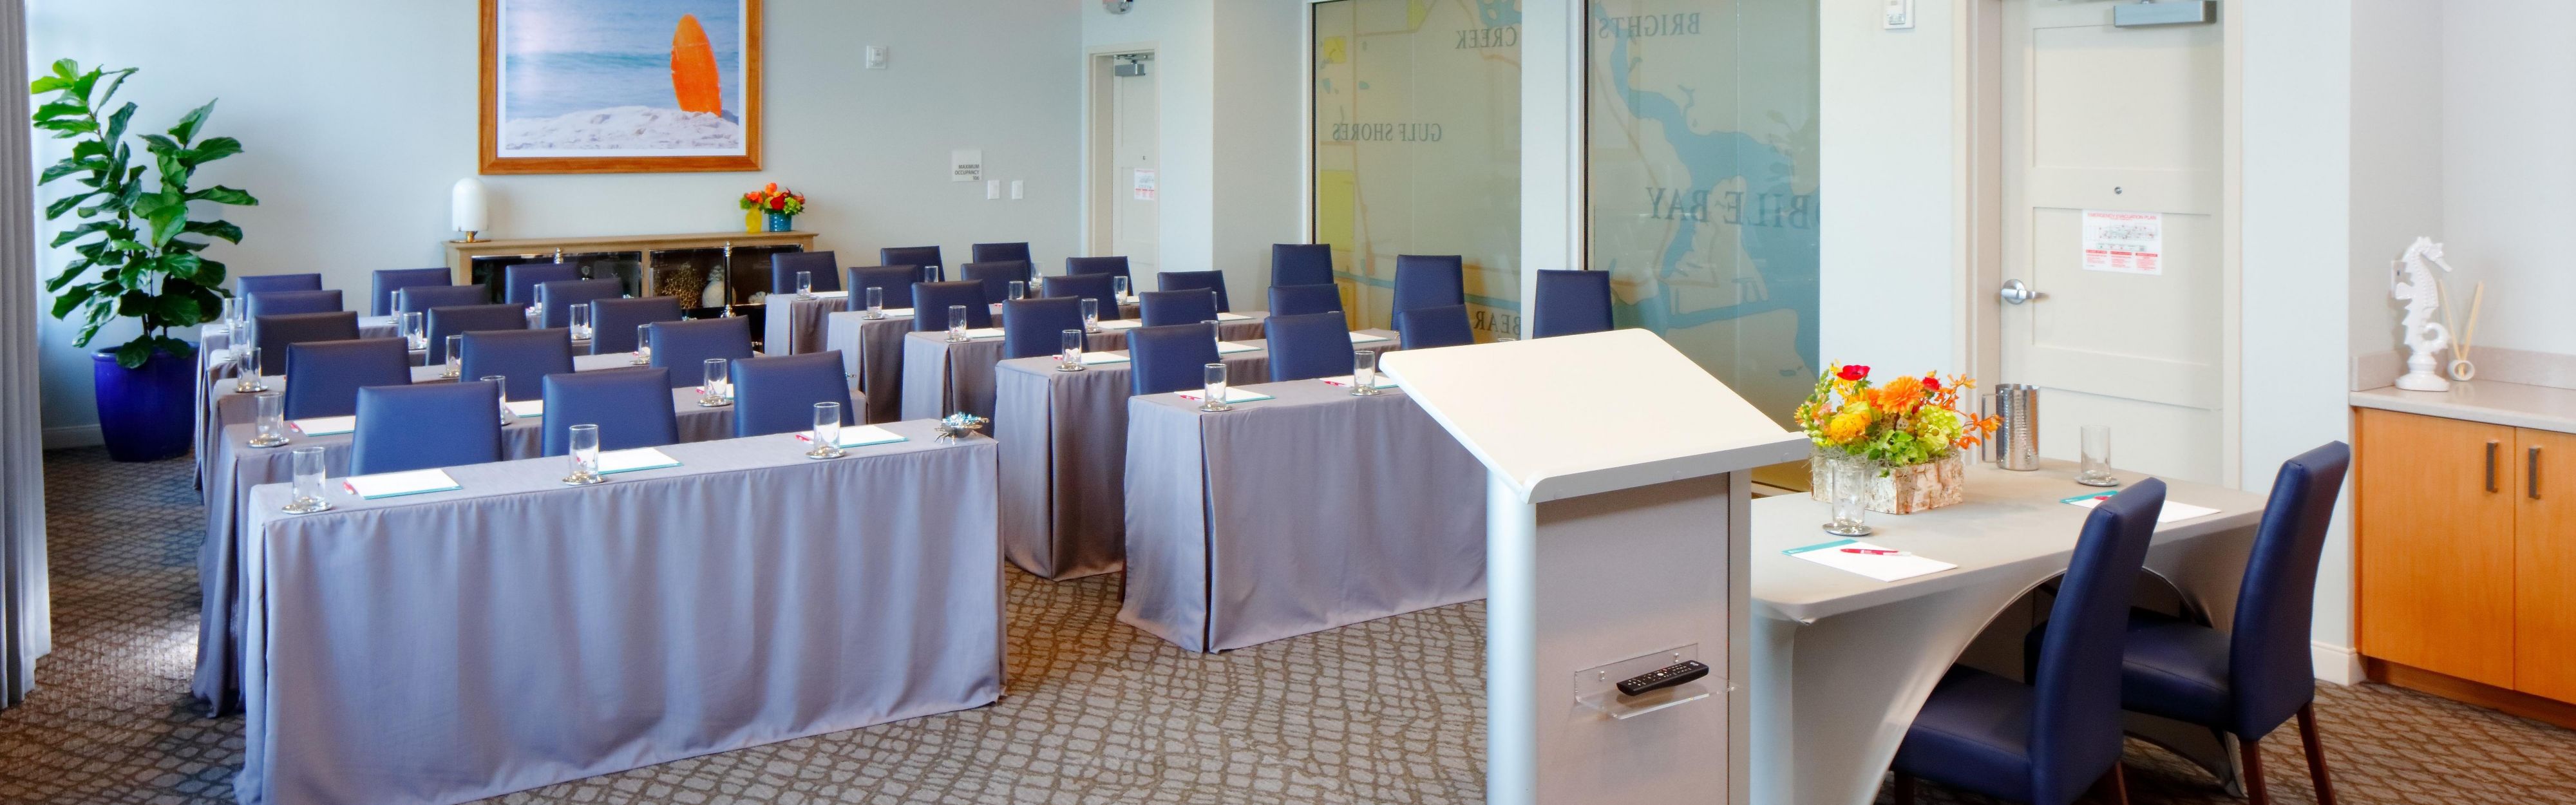 Coastal Map Room set classroom style, perfect for your next event